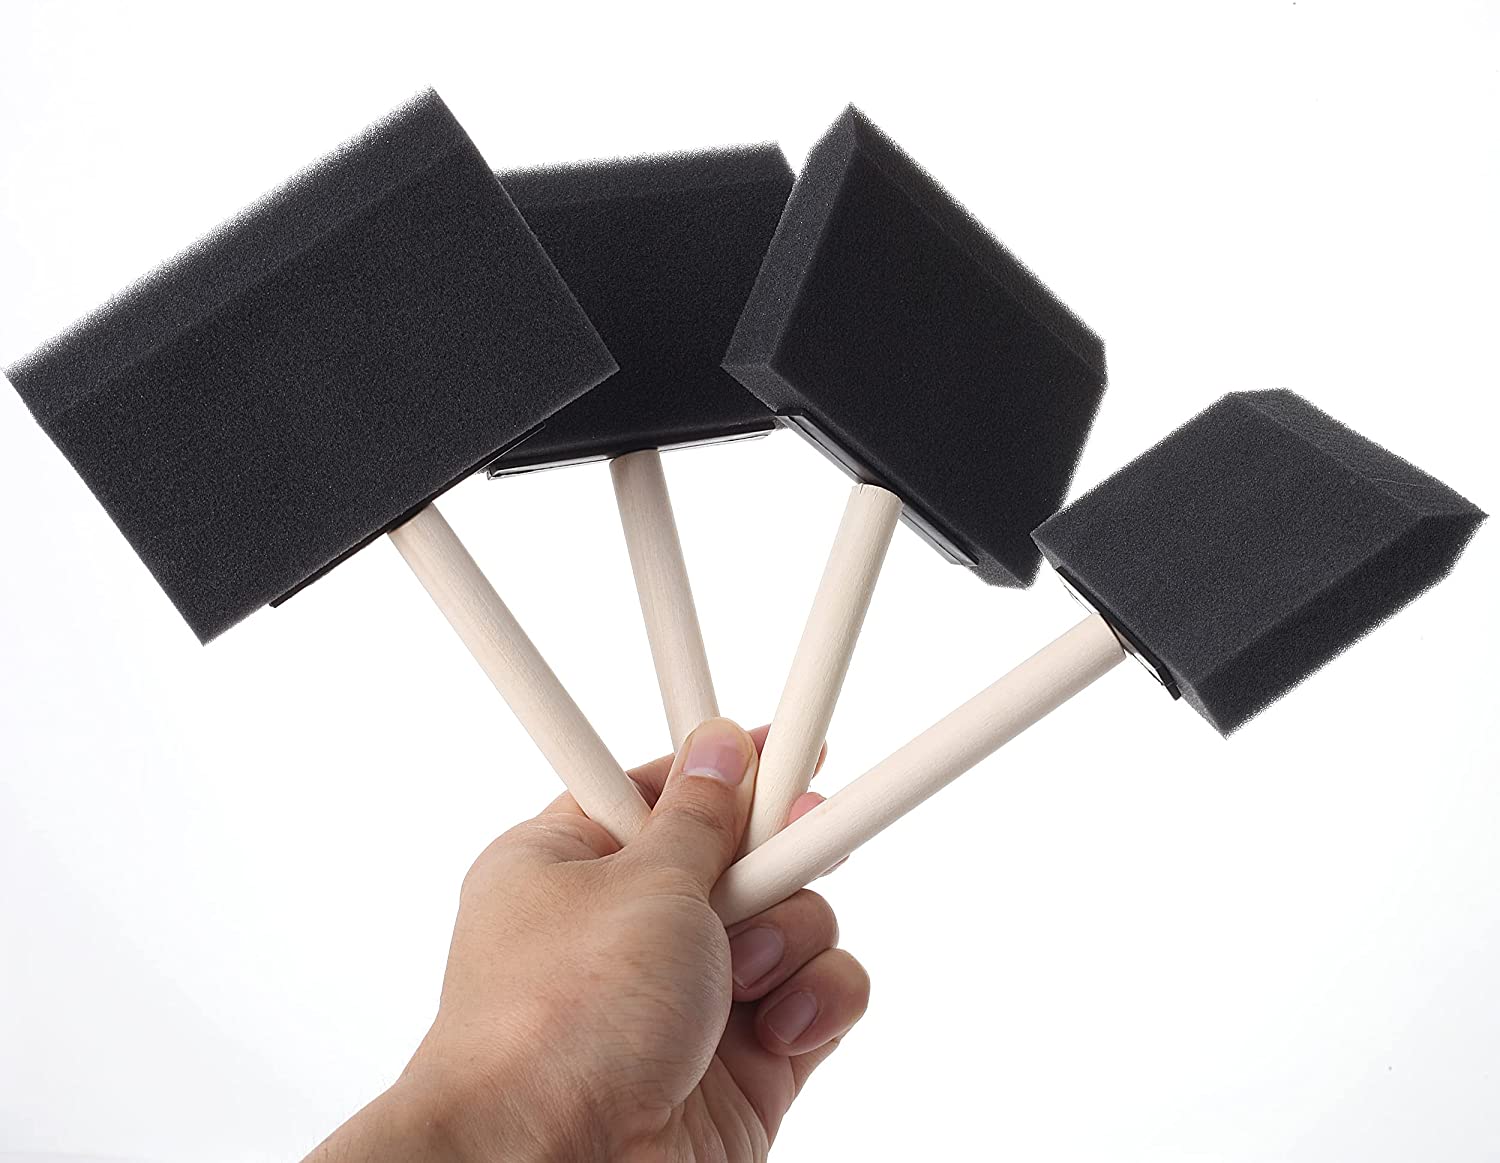 5 Pcs Sponge Brushes for Painting - 4 Pieces Small Size Foam Sponge Brush | Wood Handles Sponge Foam Brush Painting Foam Brush Tool in Black for